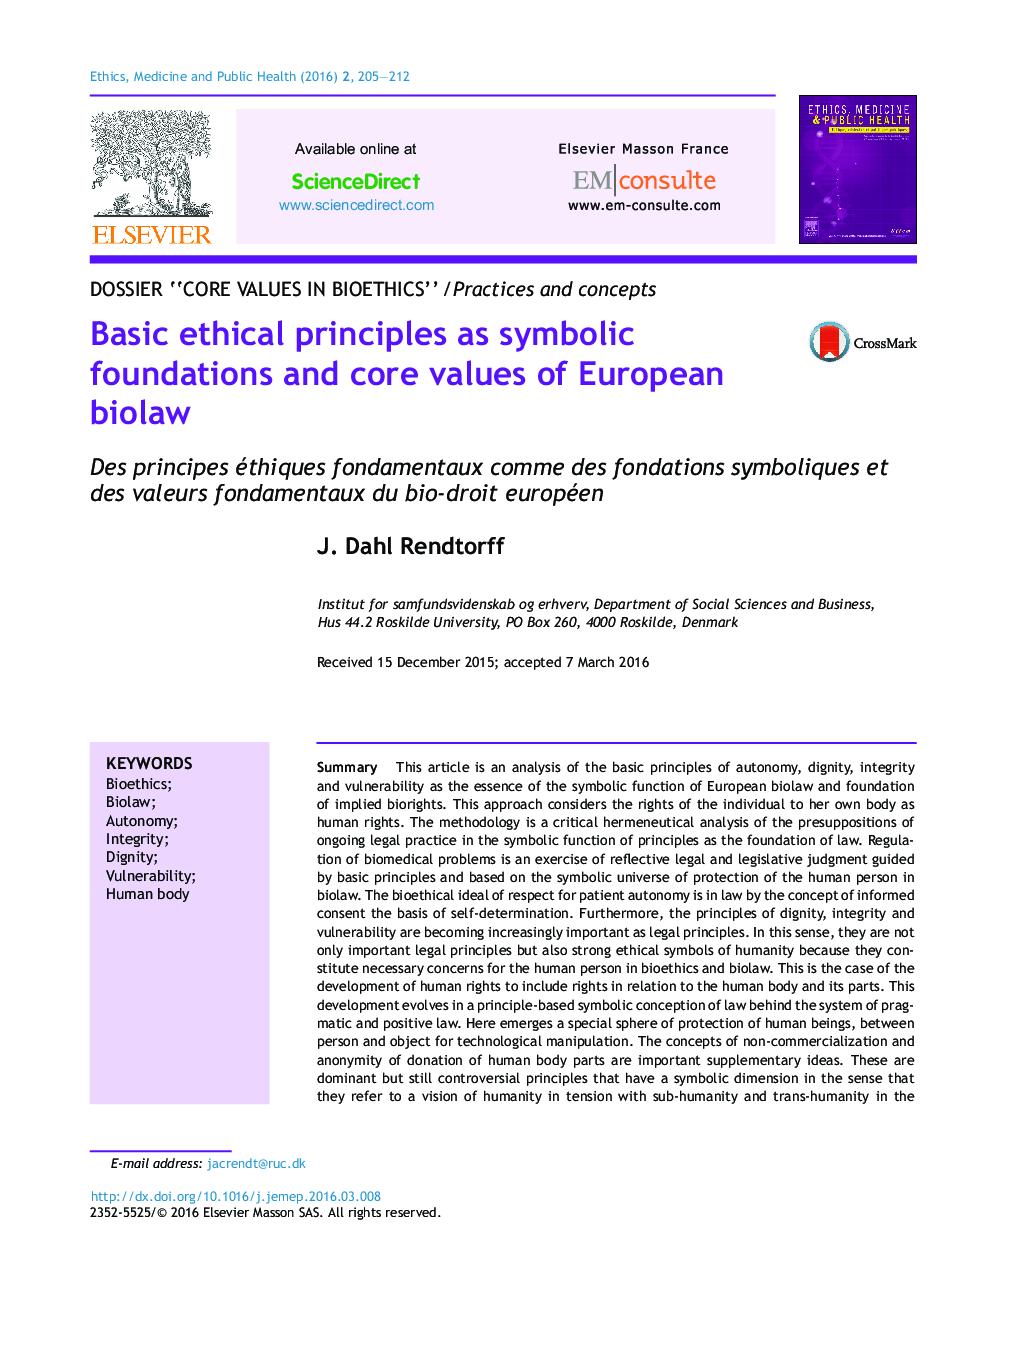 Basic ethical principles as symbolic foundations and core values of European biolaw